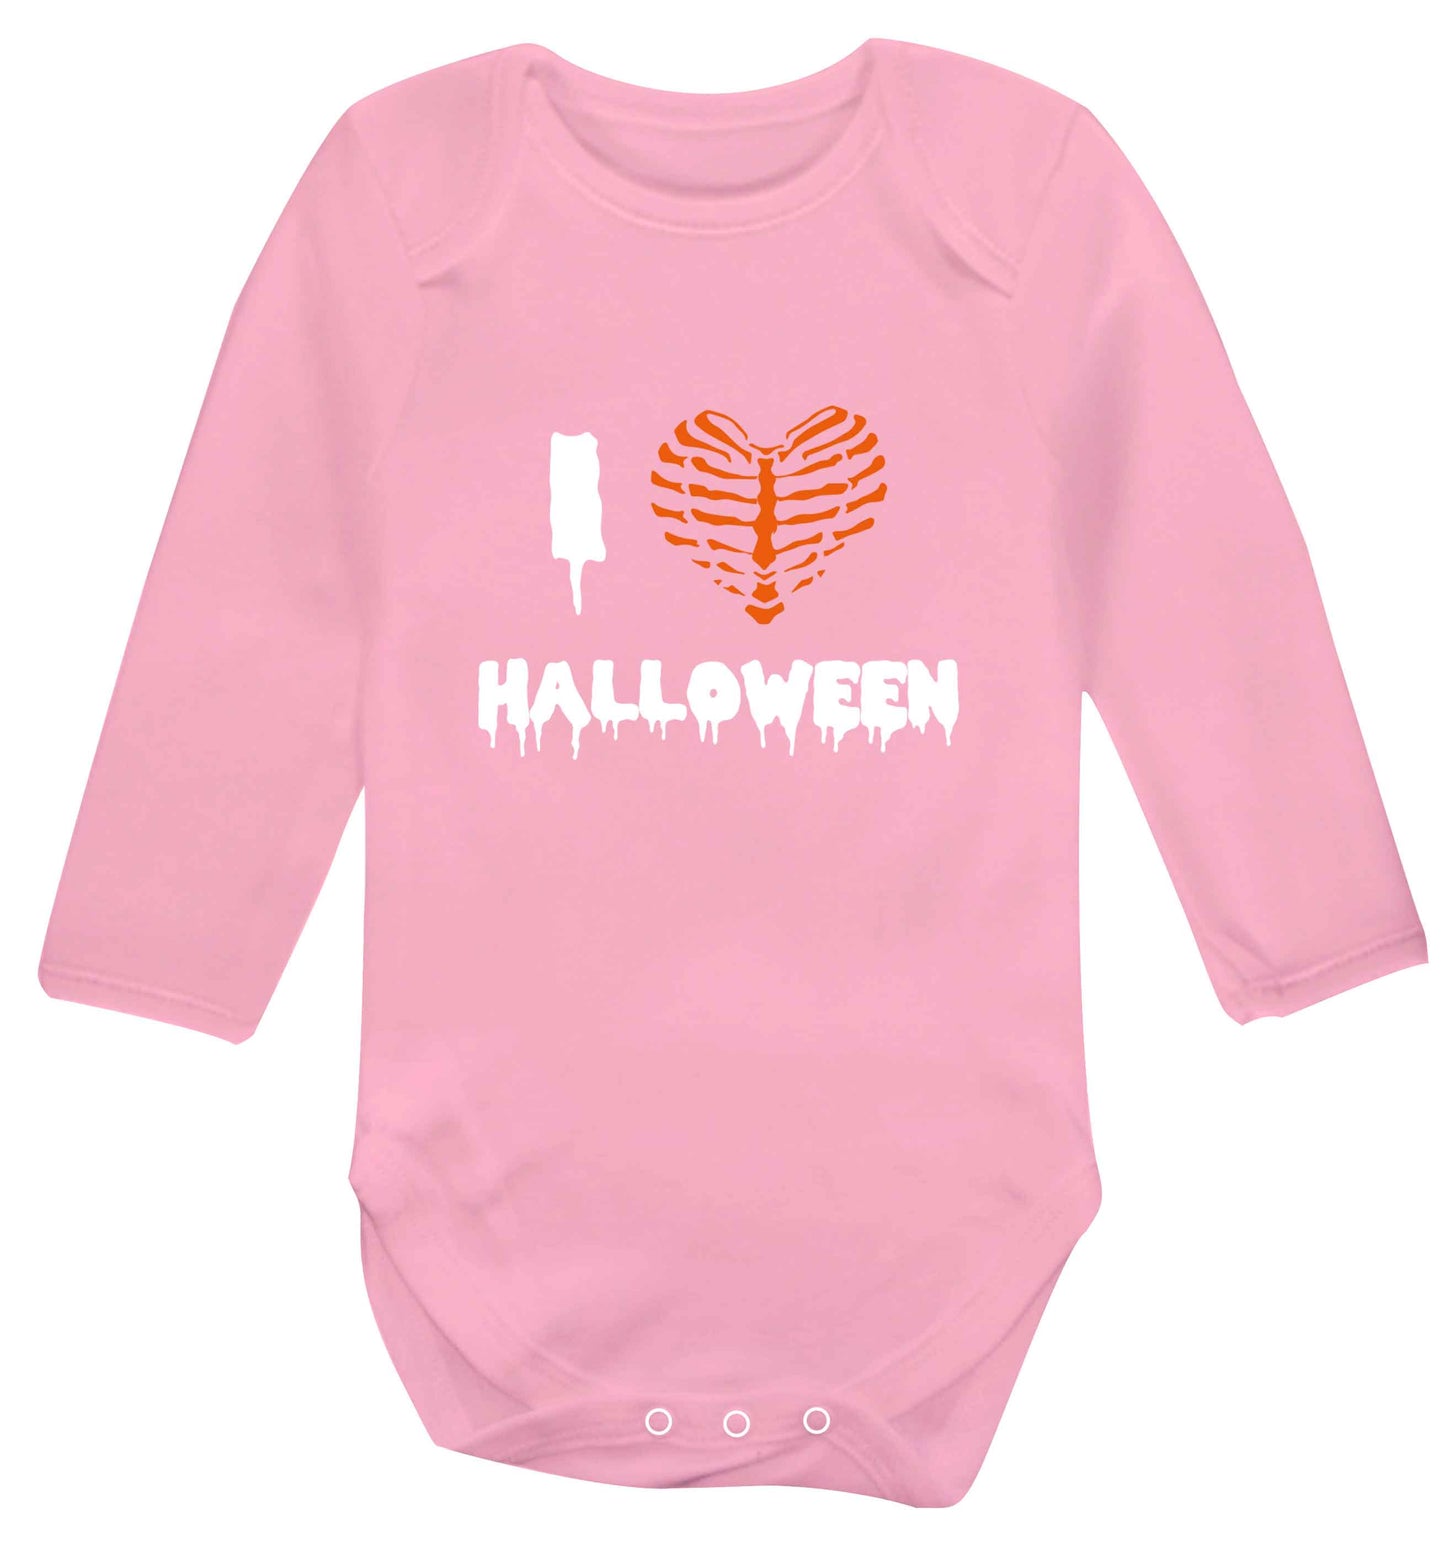 I love halloween baby vest long sleeved pale pink 6-12 months